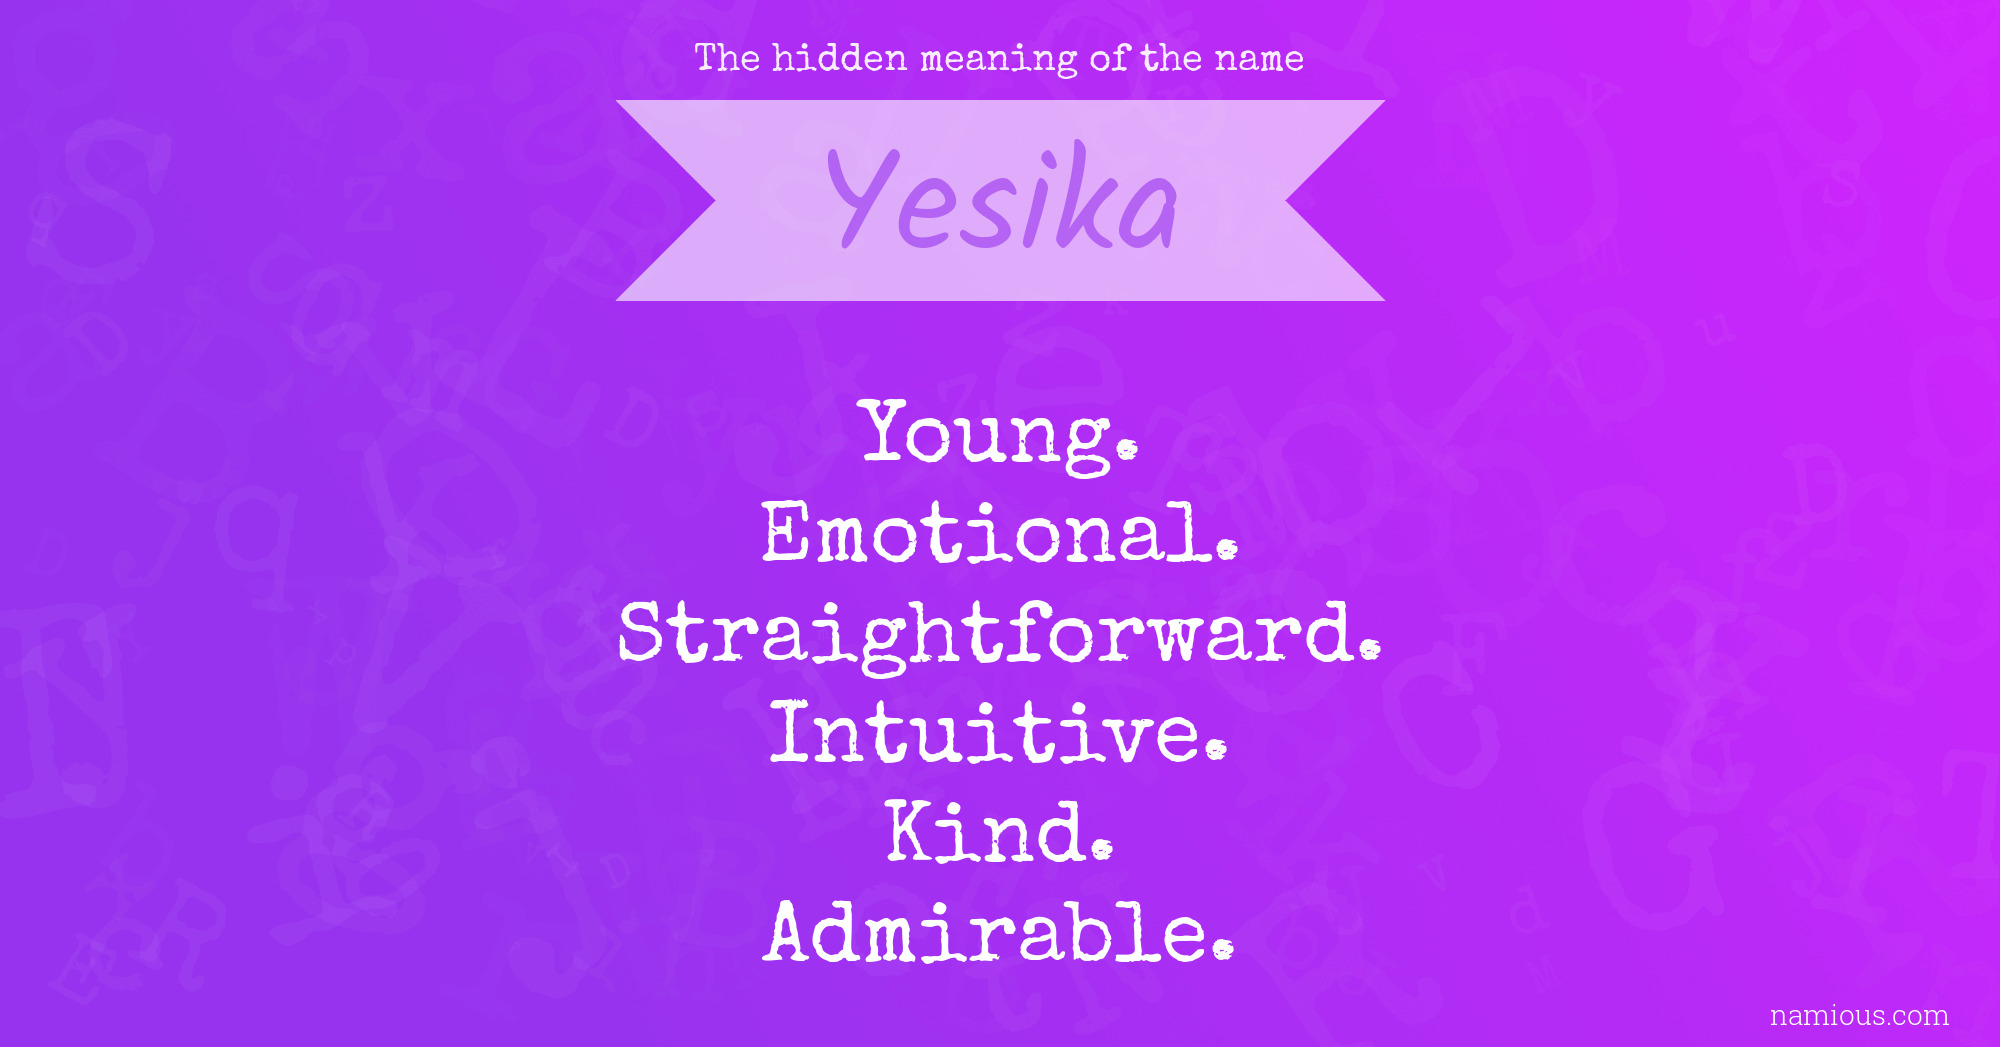 The hidden meaning of the name Yesika